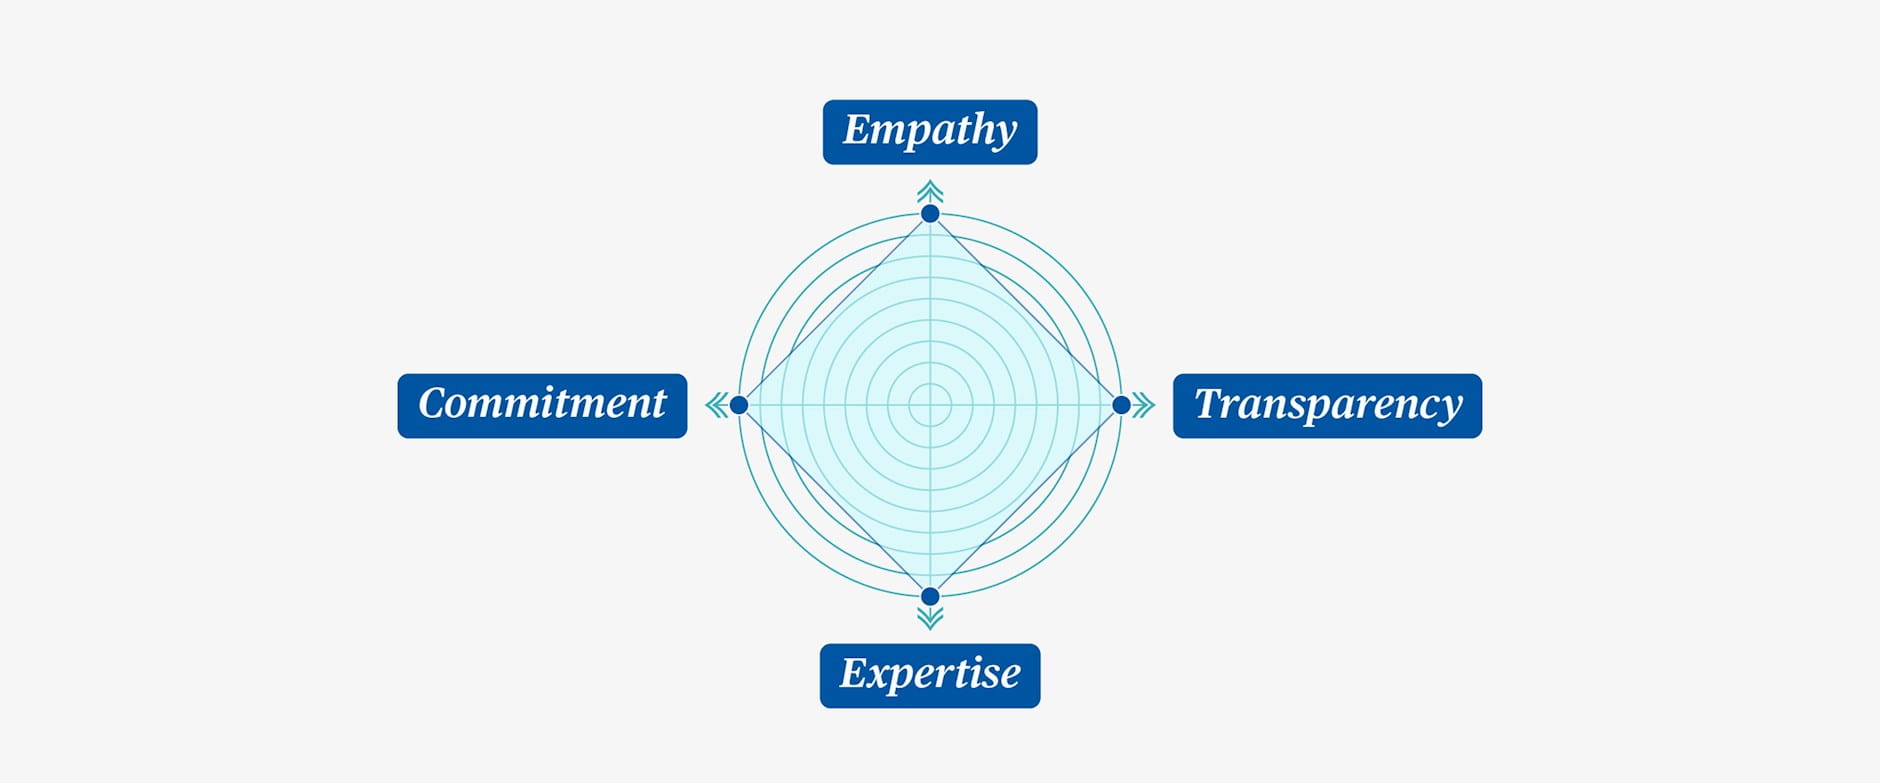 A diagram in the style of a radar chart, with the four major factors labeled like points on a compass: Transparency, Expertise, Commitment, and Empathy.